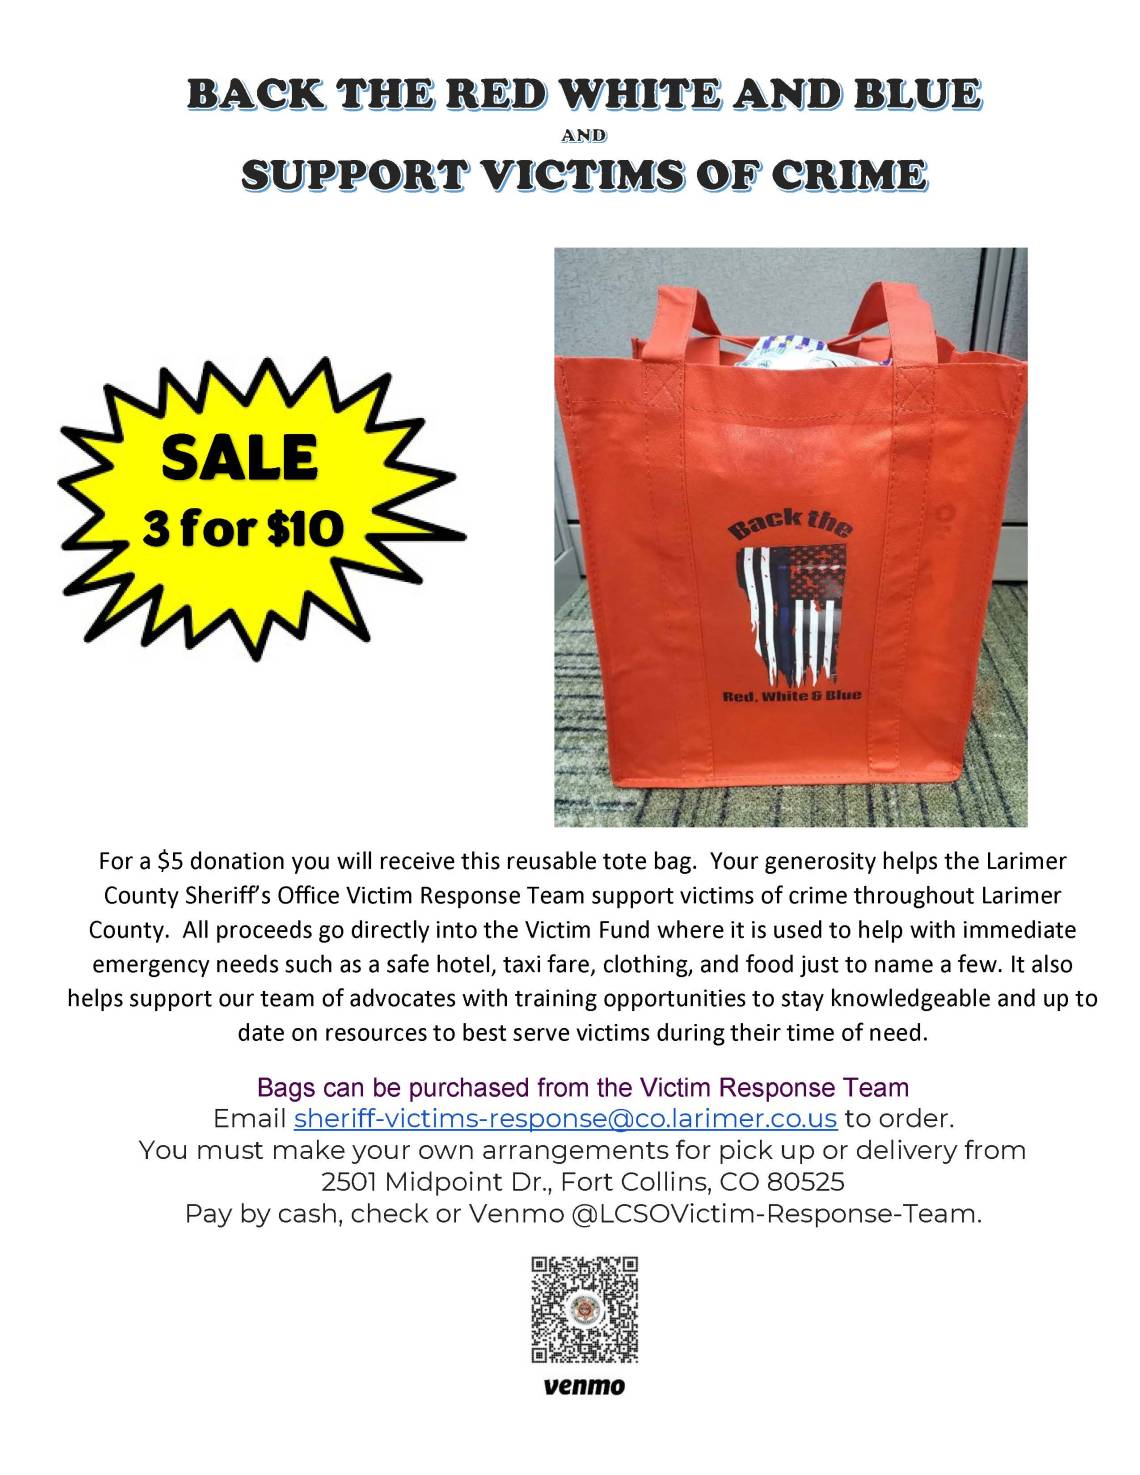 VRT Victim Relief Fundraiser flyer featuring tote bags 3 for $10